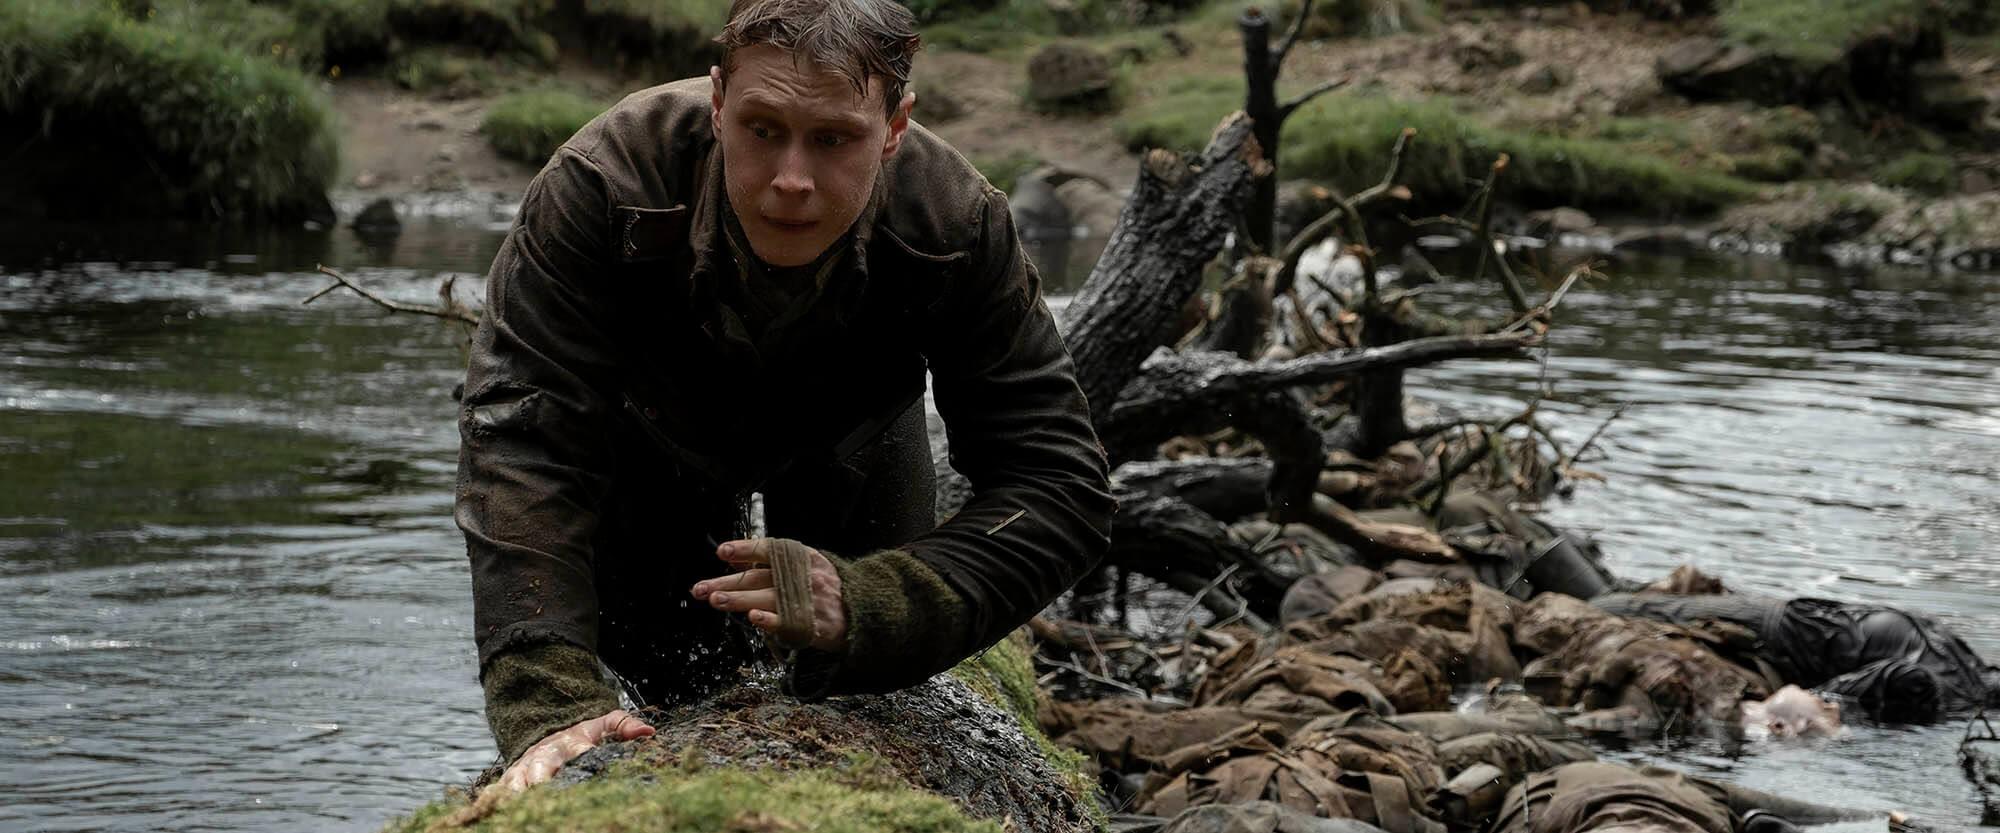 Lance Corporal Will Schofield (George MacKay) in "1917" (2019).